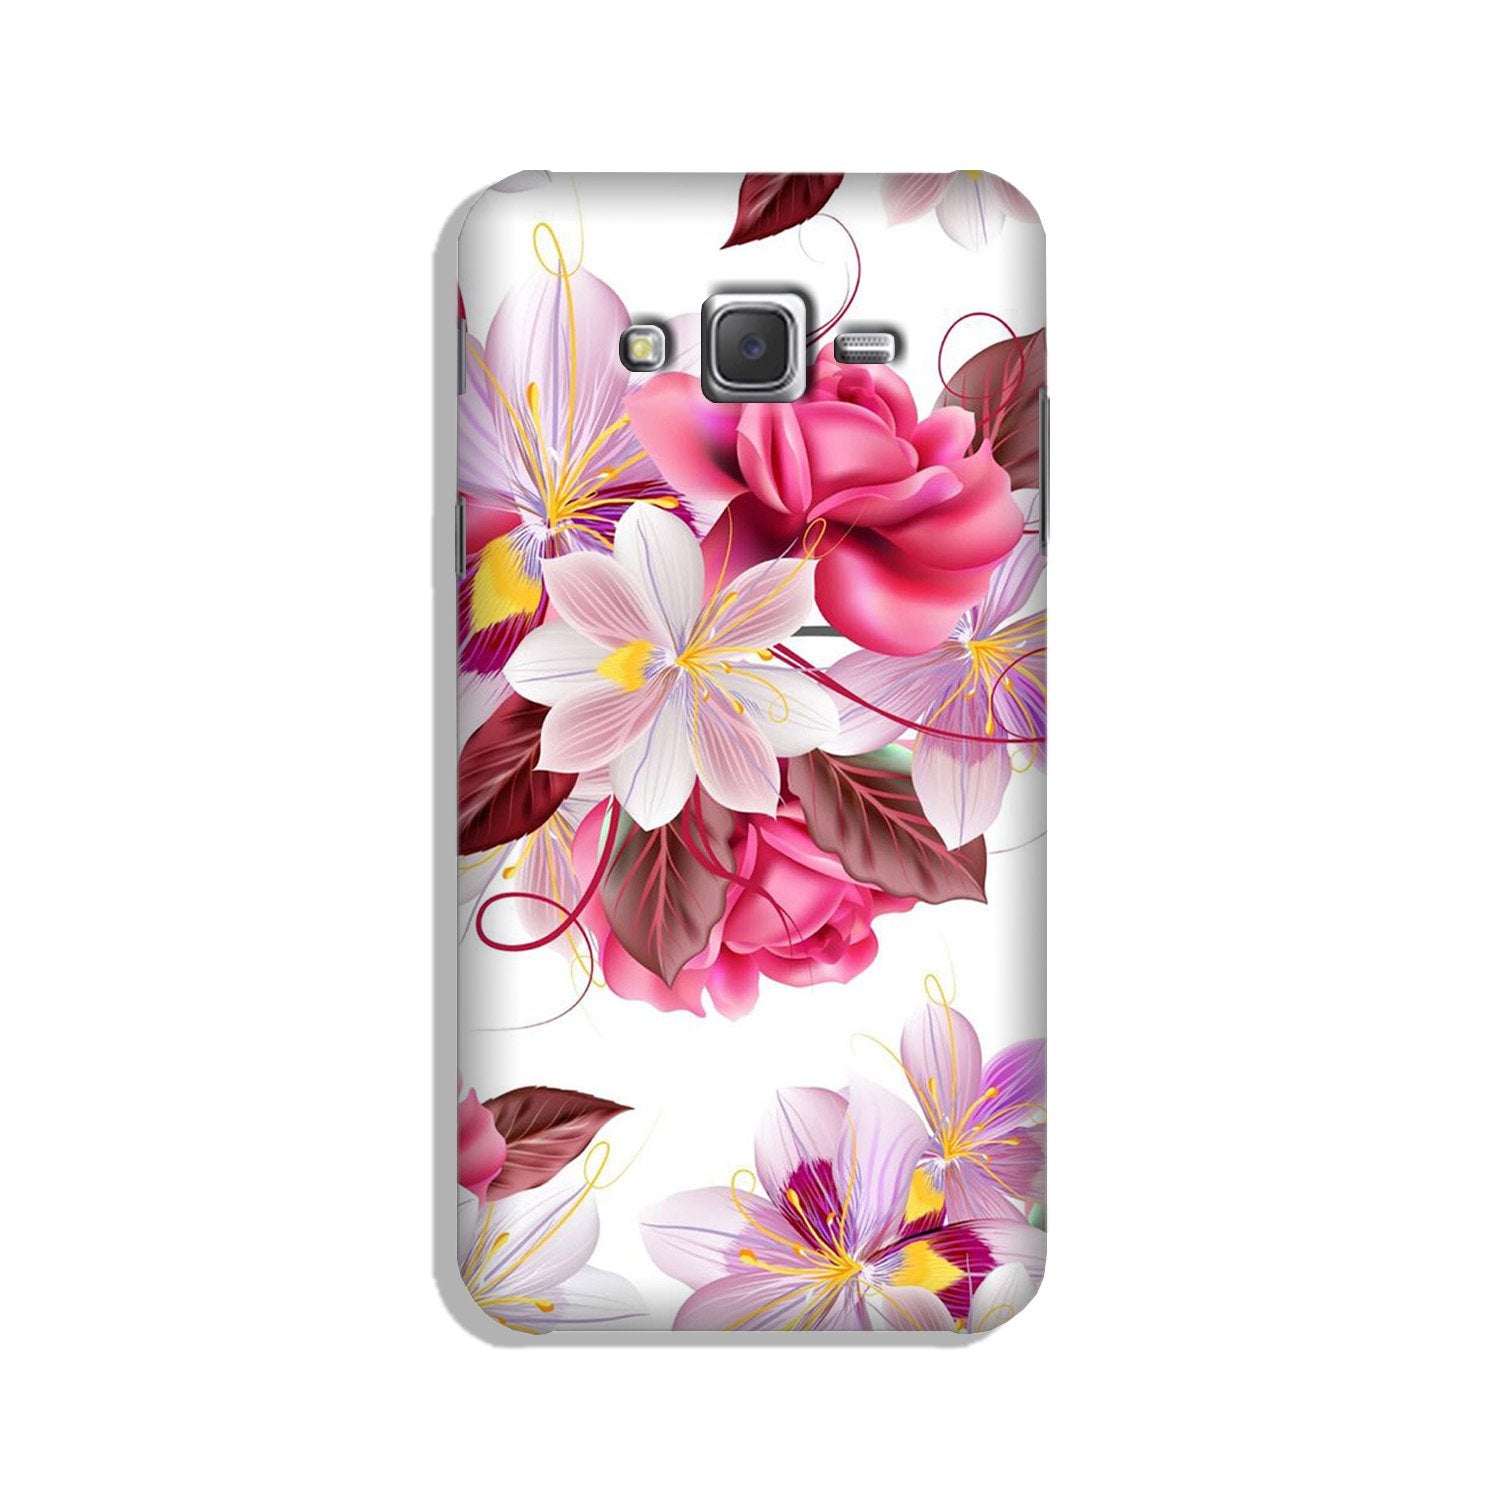 Beautiful flowers Case for Galaxy J5 (2015)